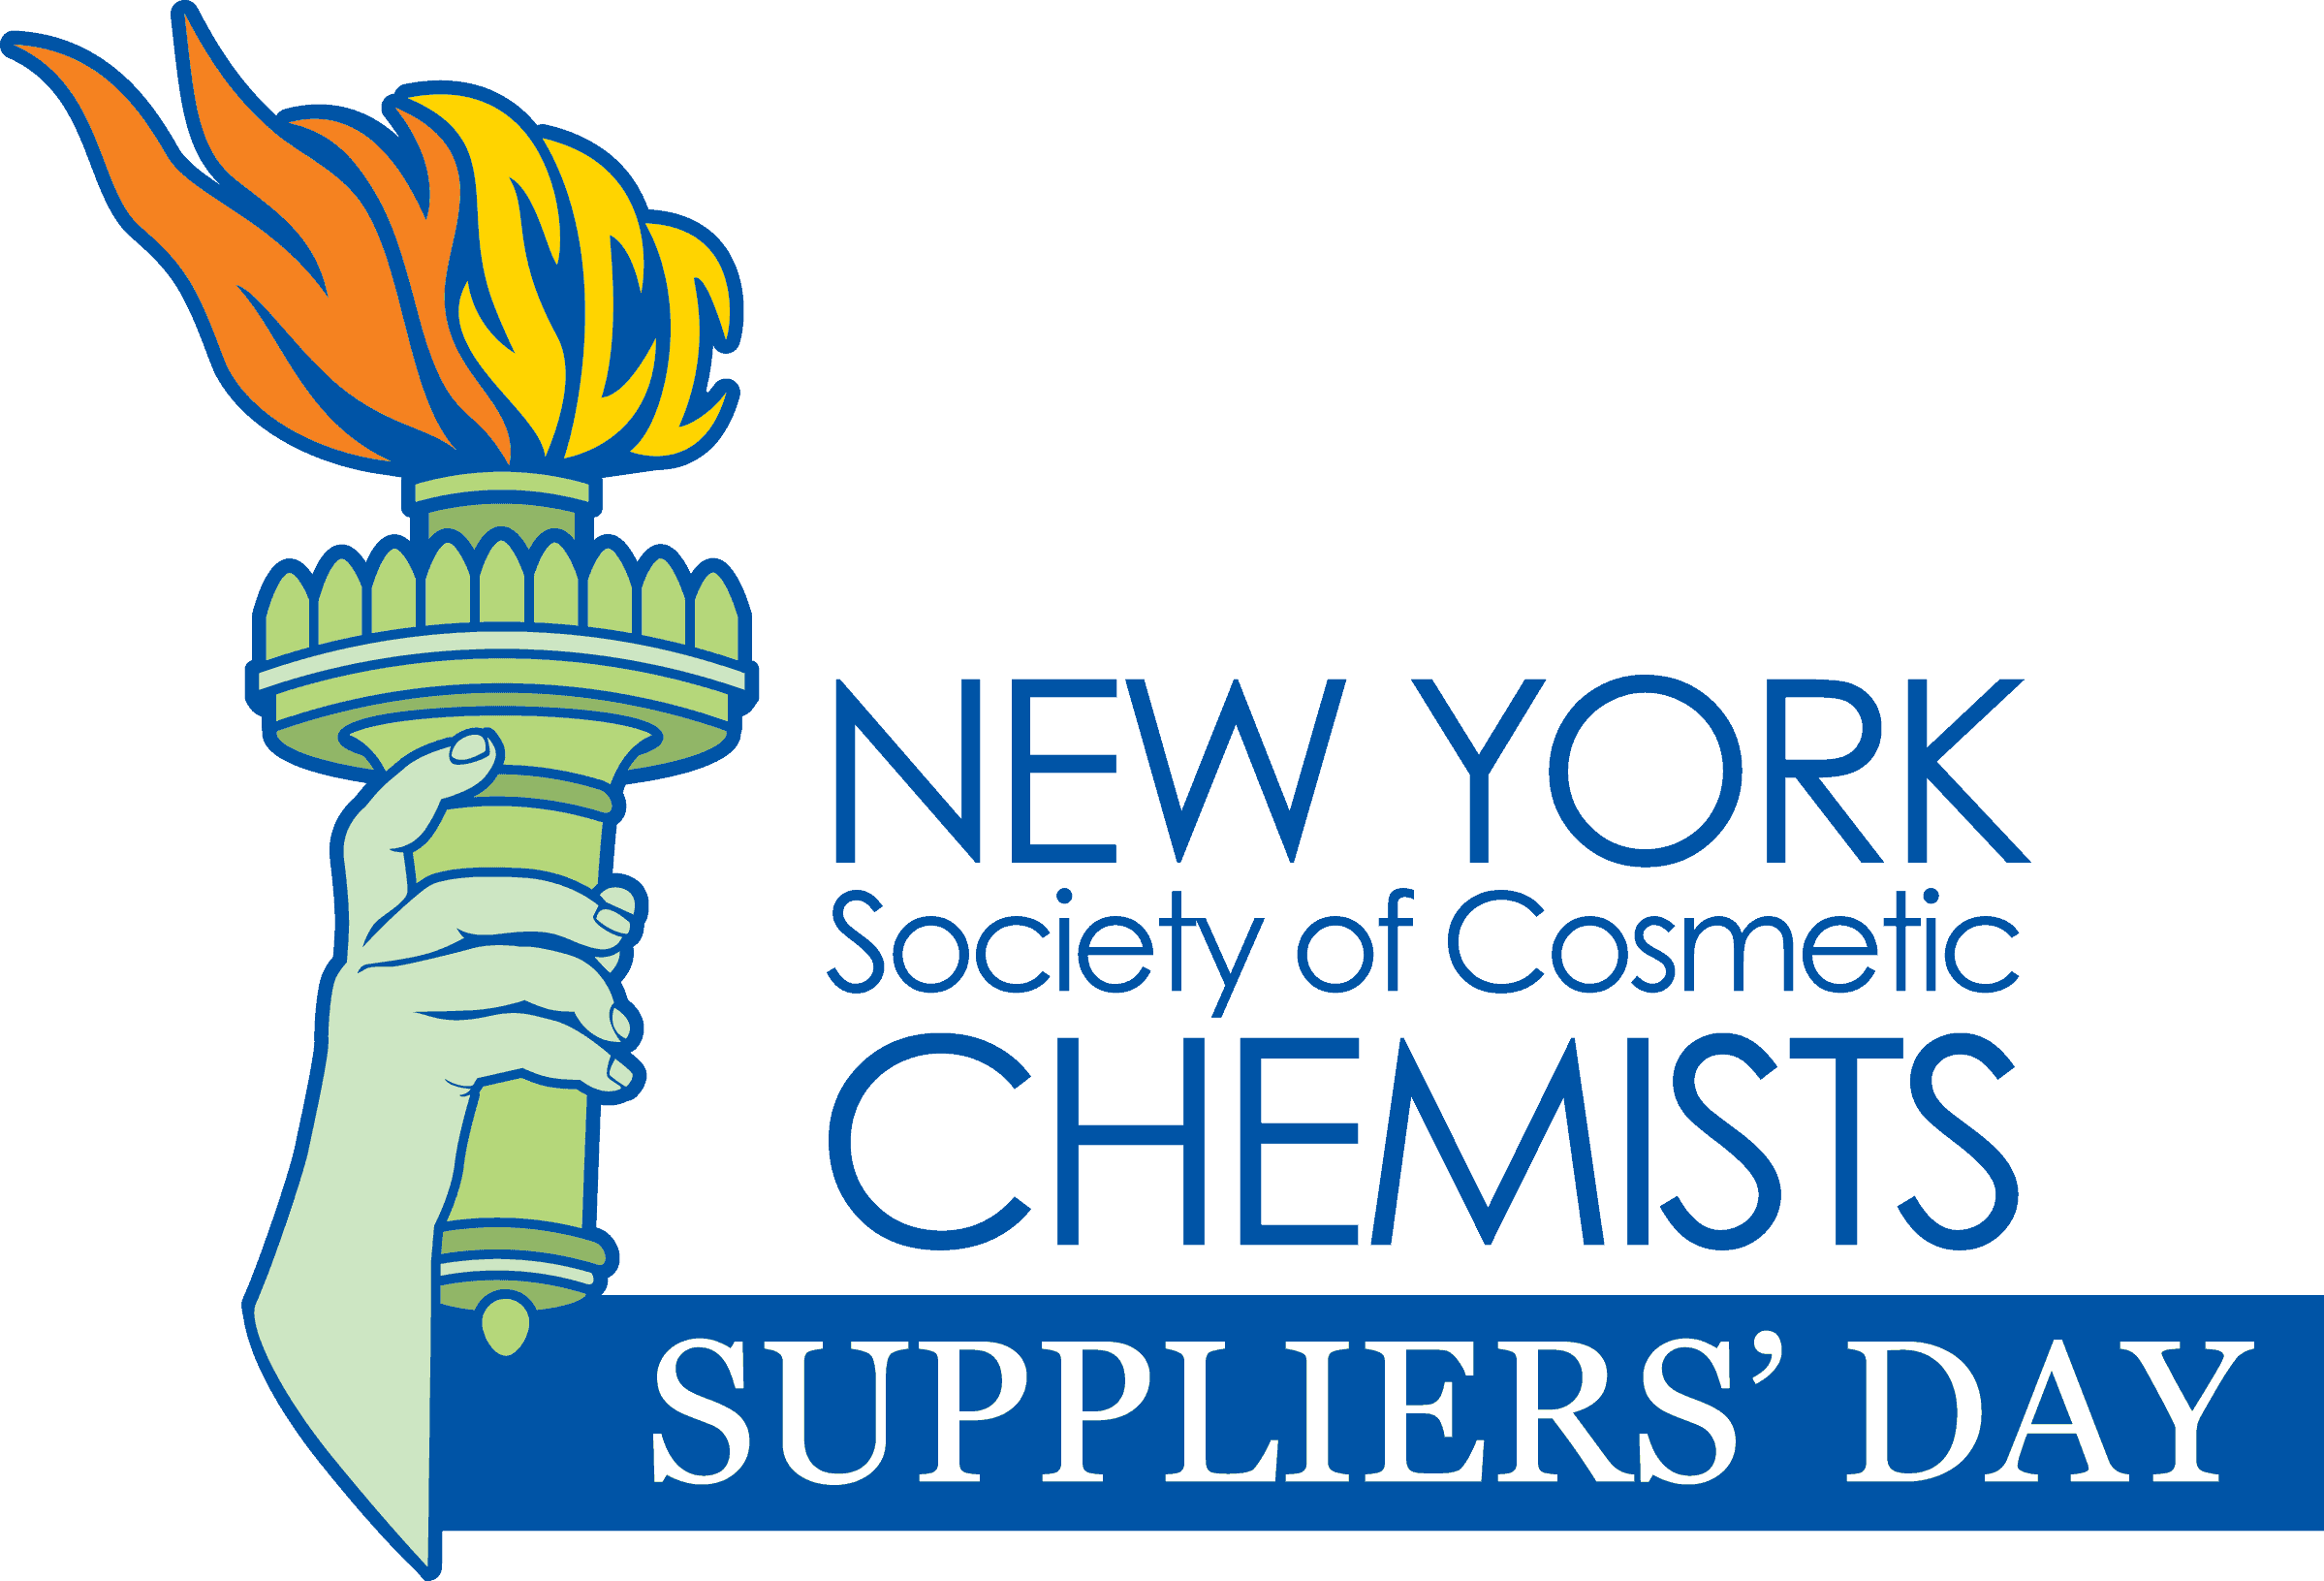 NYSCC Suppliers Day Logo